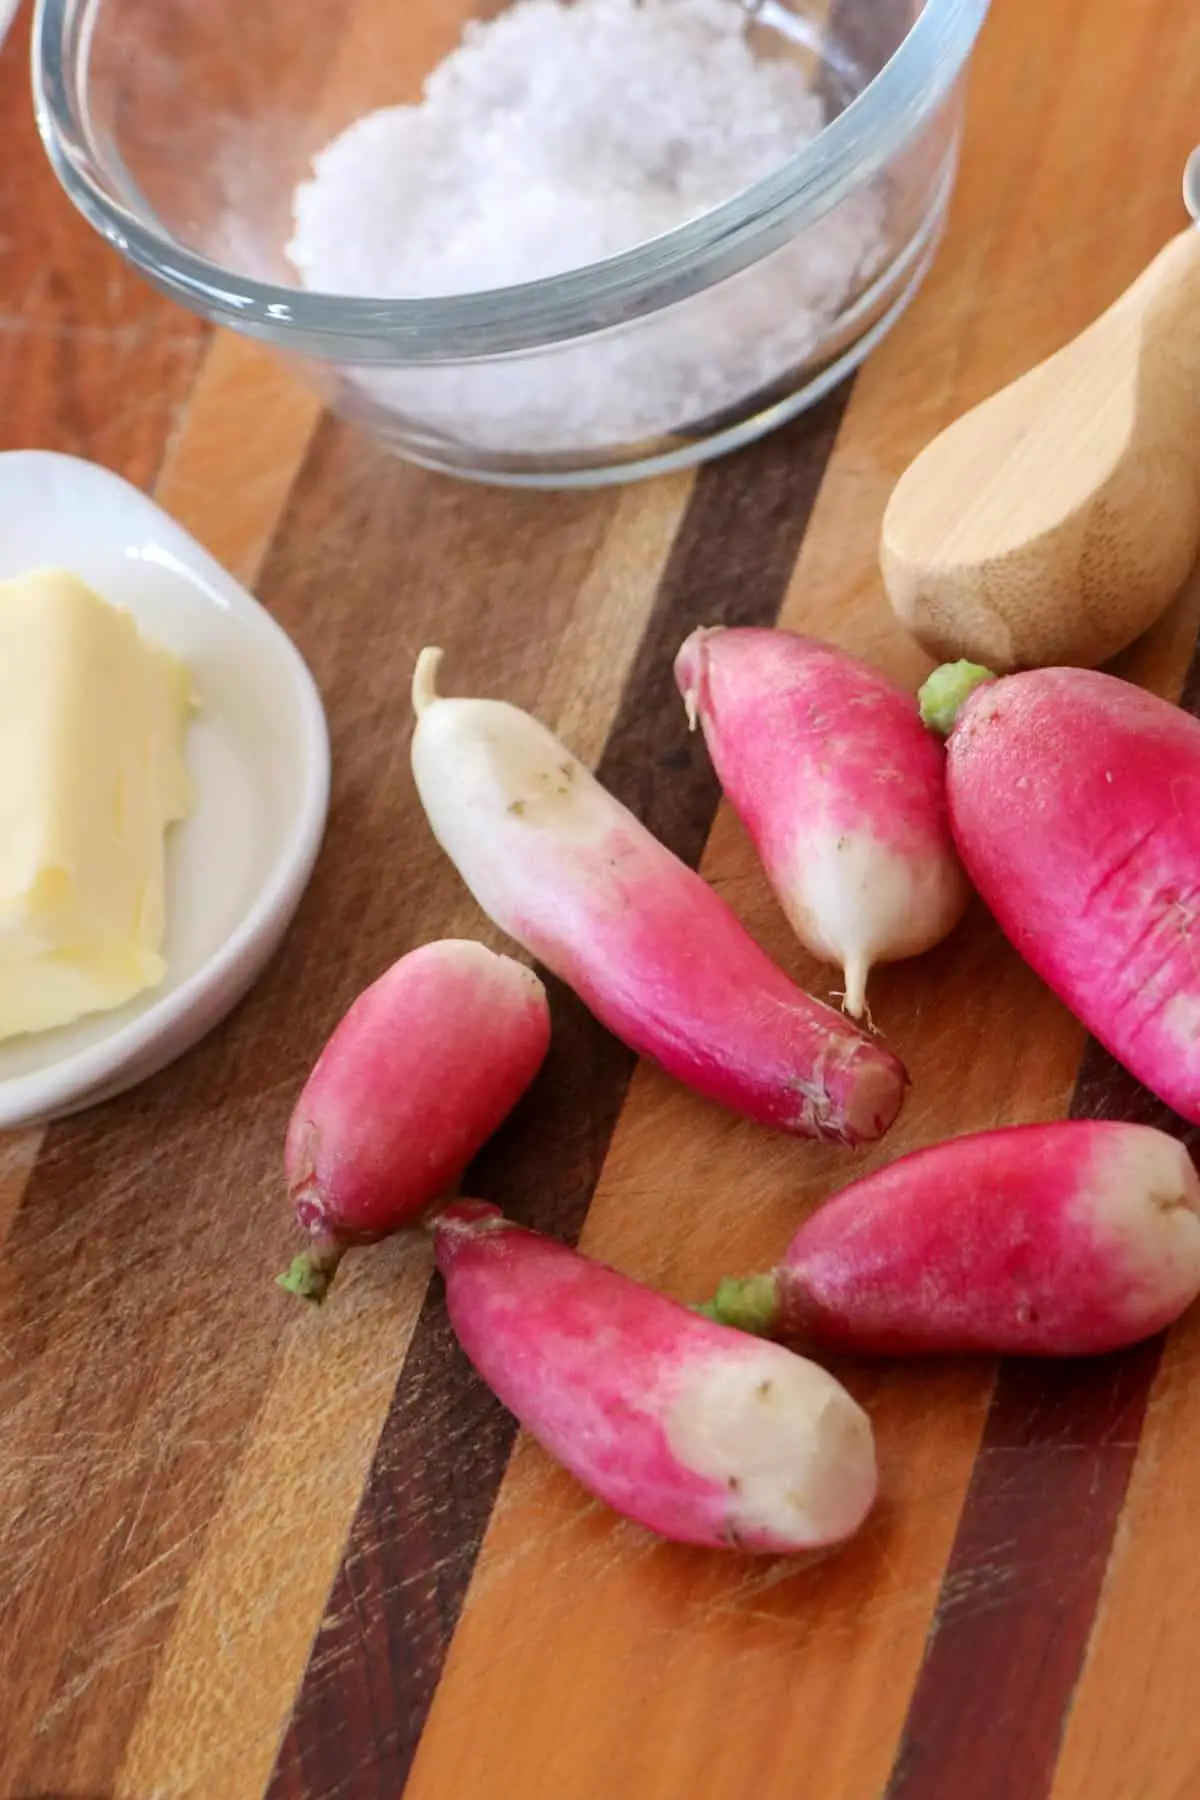 French breakfast radishes on a wooden cutting board, glass bowl with sea salt in the background, white dish with salt on the left, and top right a wooden handle of a cheese knife.